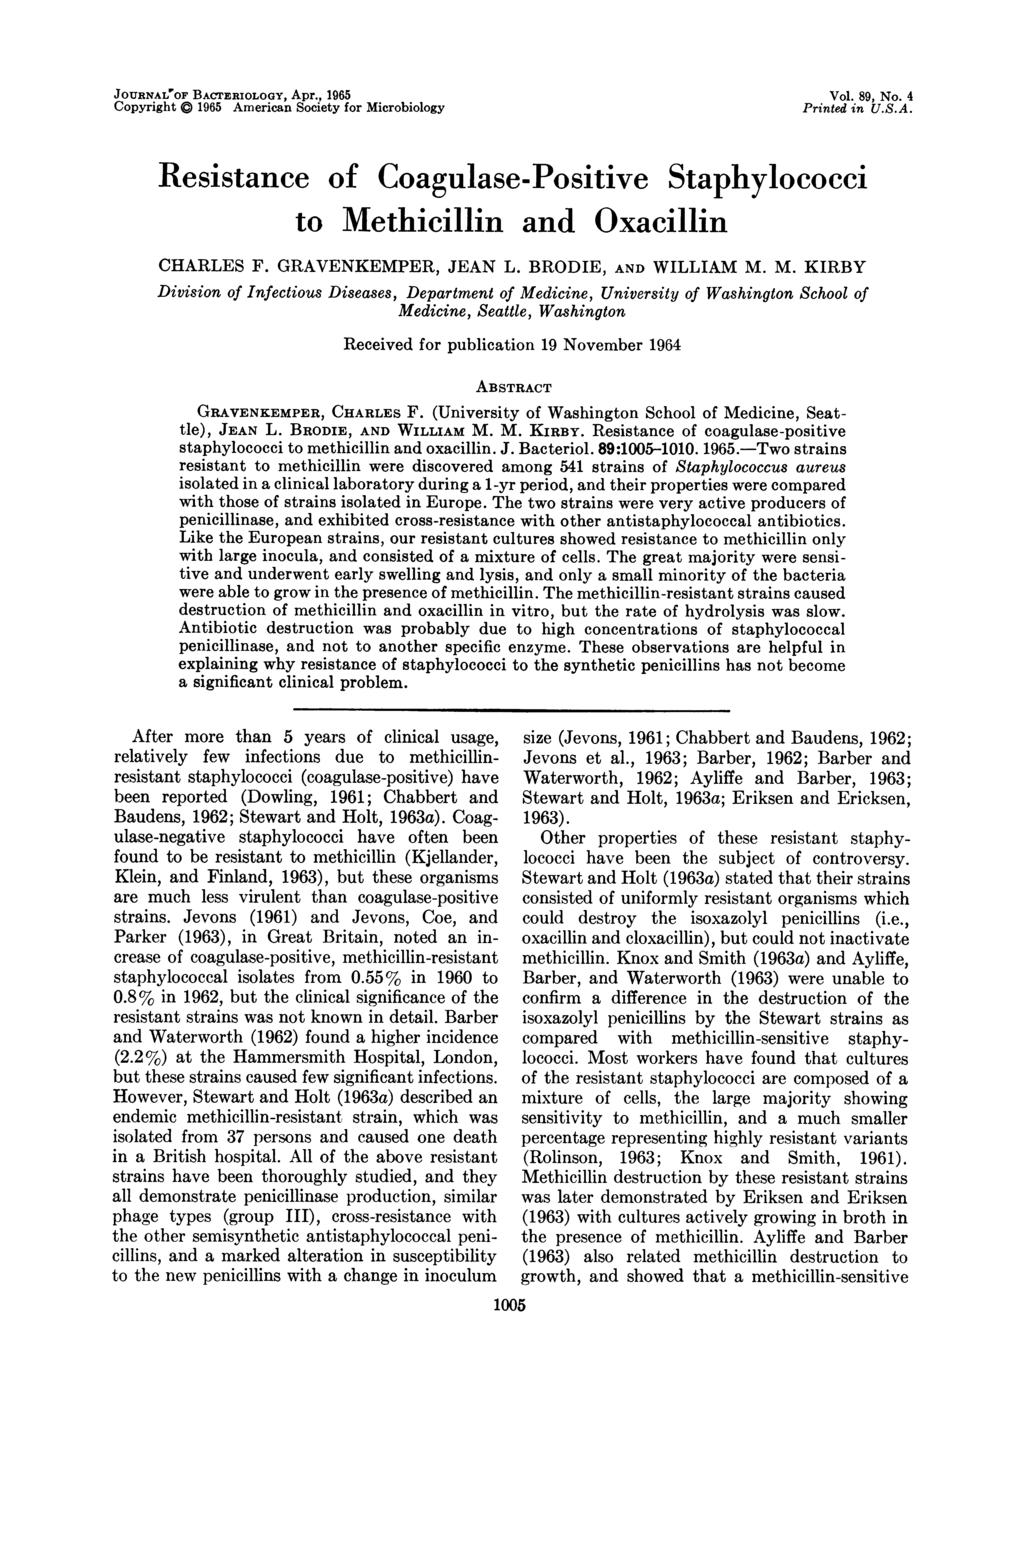 JOURNALOF BACrERIOLOGY, Apr., 1965 Copyright a 1965 American Society for Microbiology Vol. 89, No. 4 Printed in U.S.A. Resistance of Coagulase-Positive Staphylococci to Methicillin and Oxacillin CHARLES F.